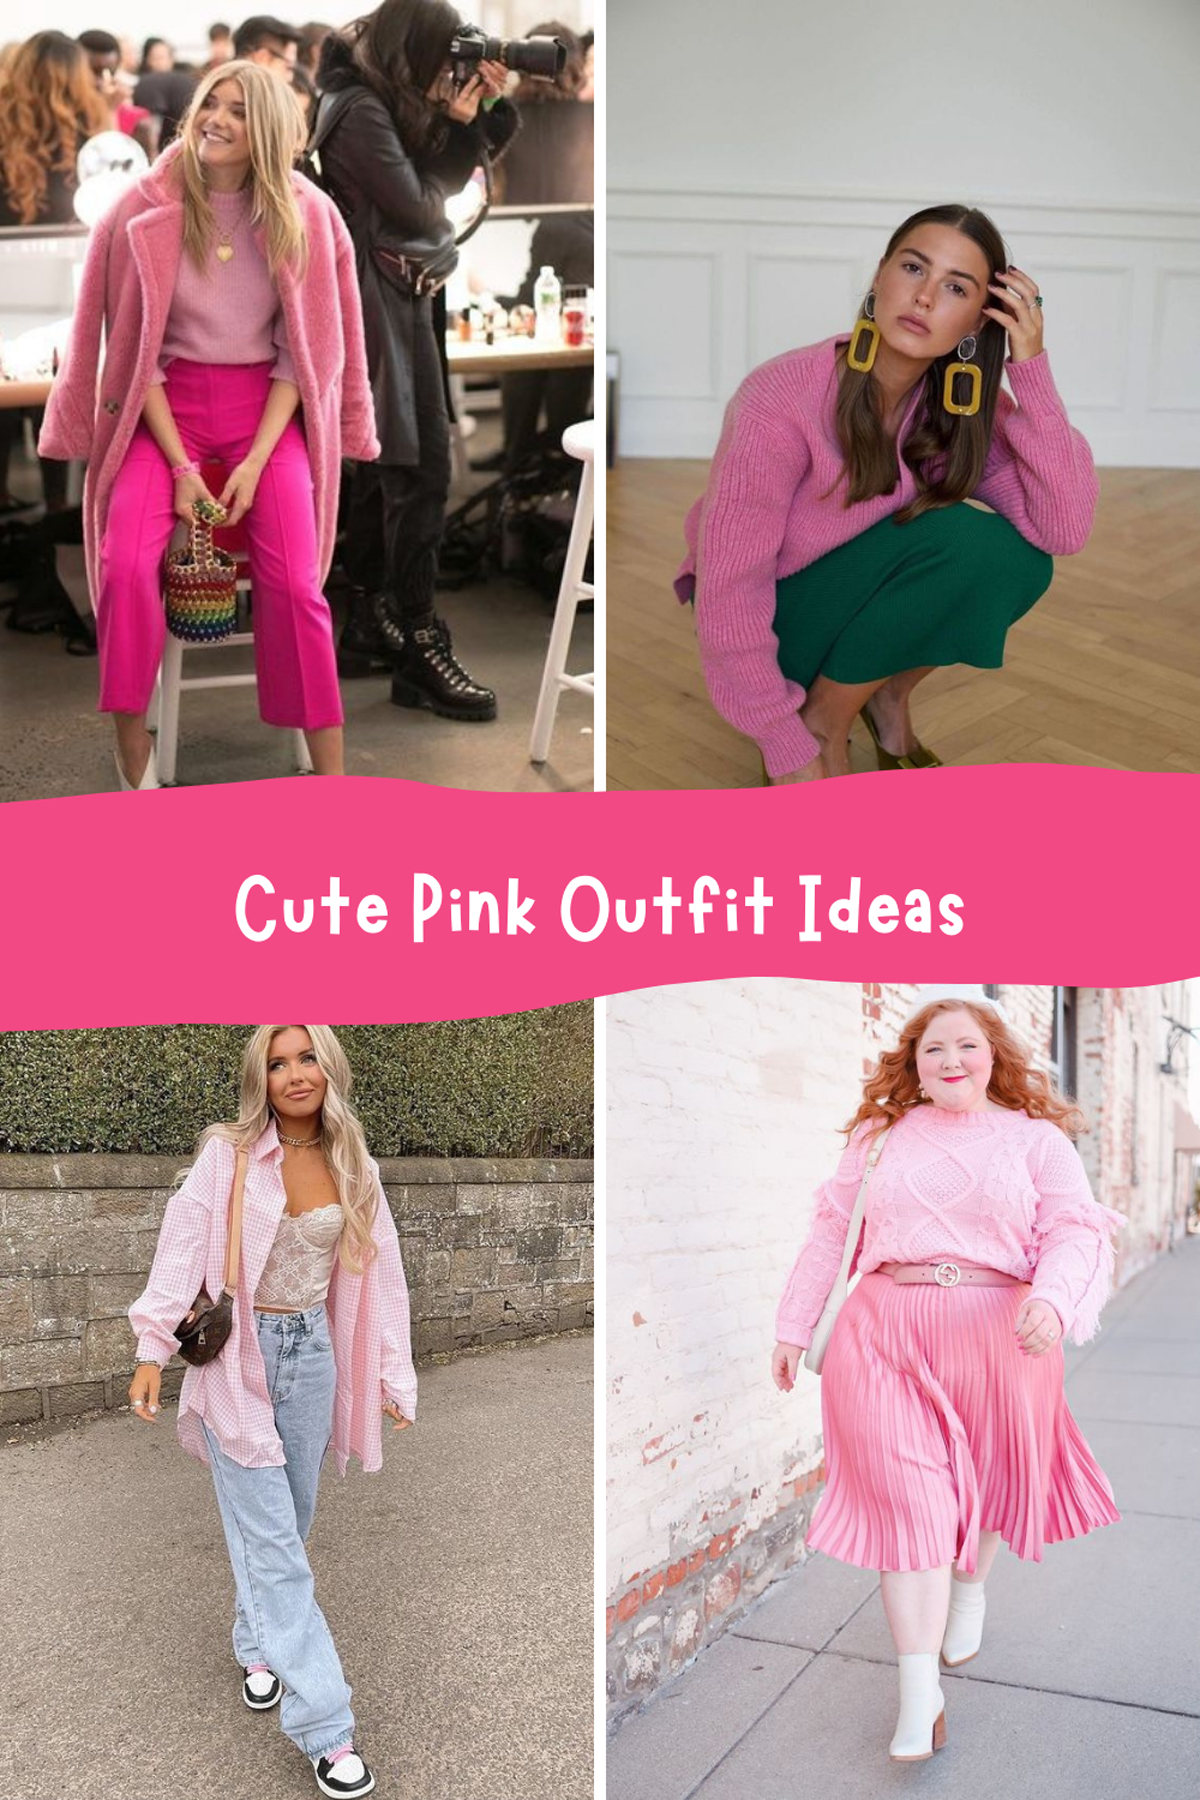 Cute Pink Outfit Ideas